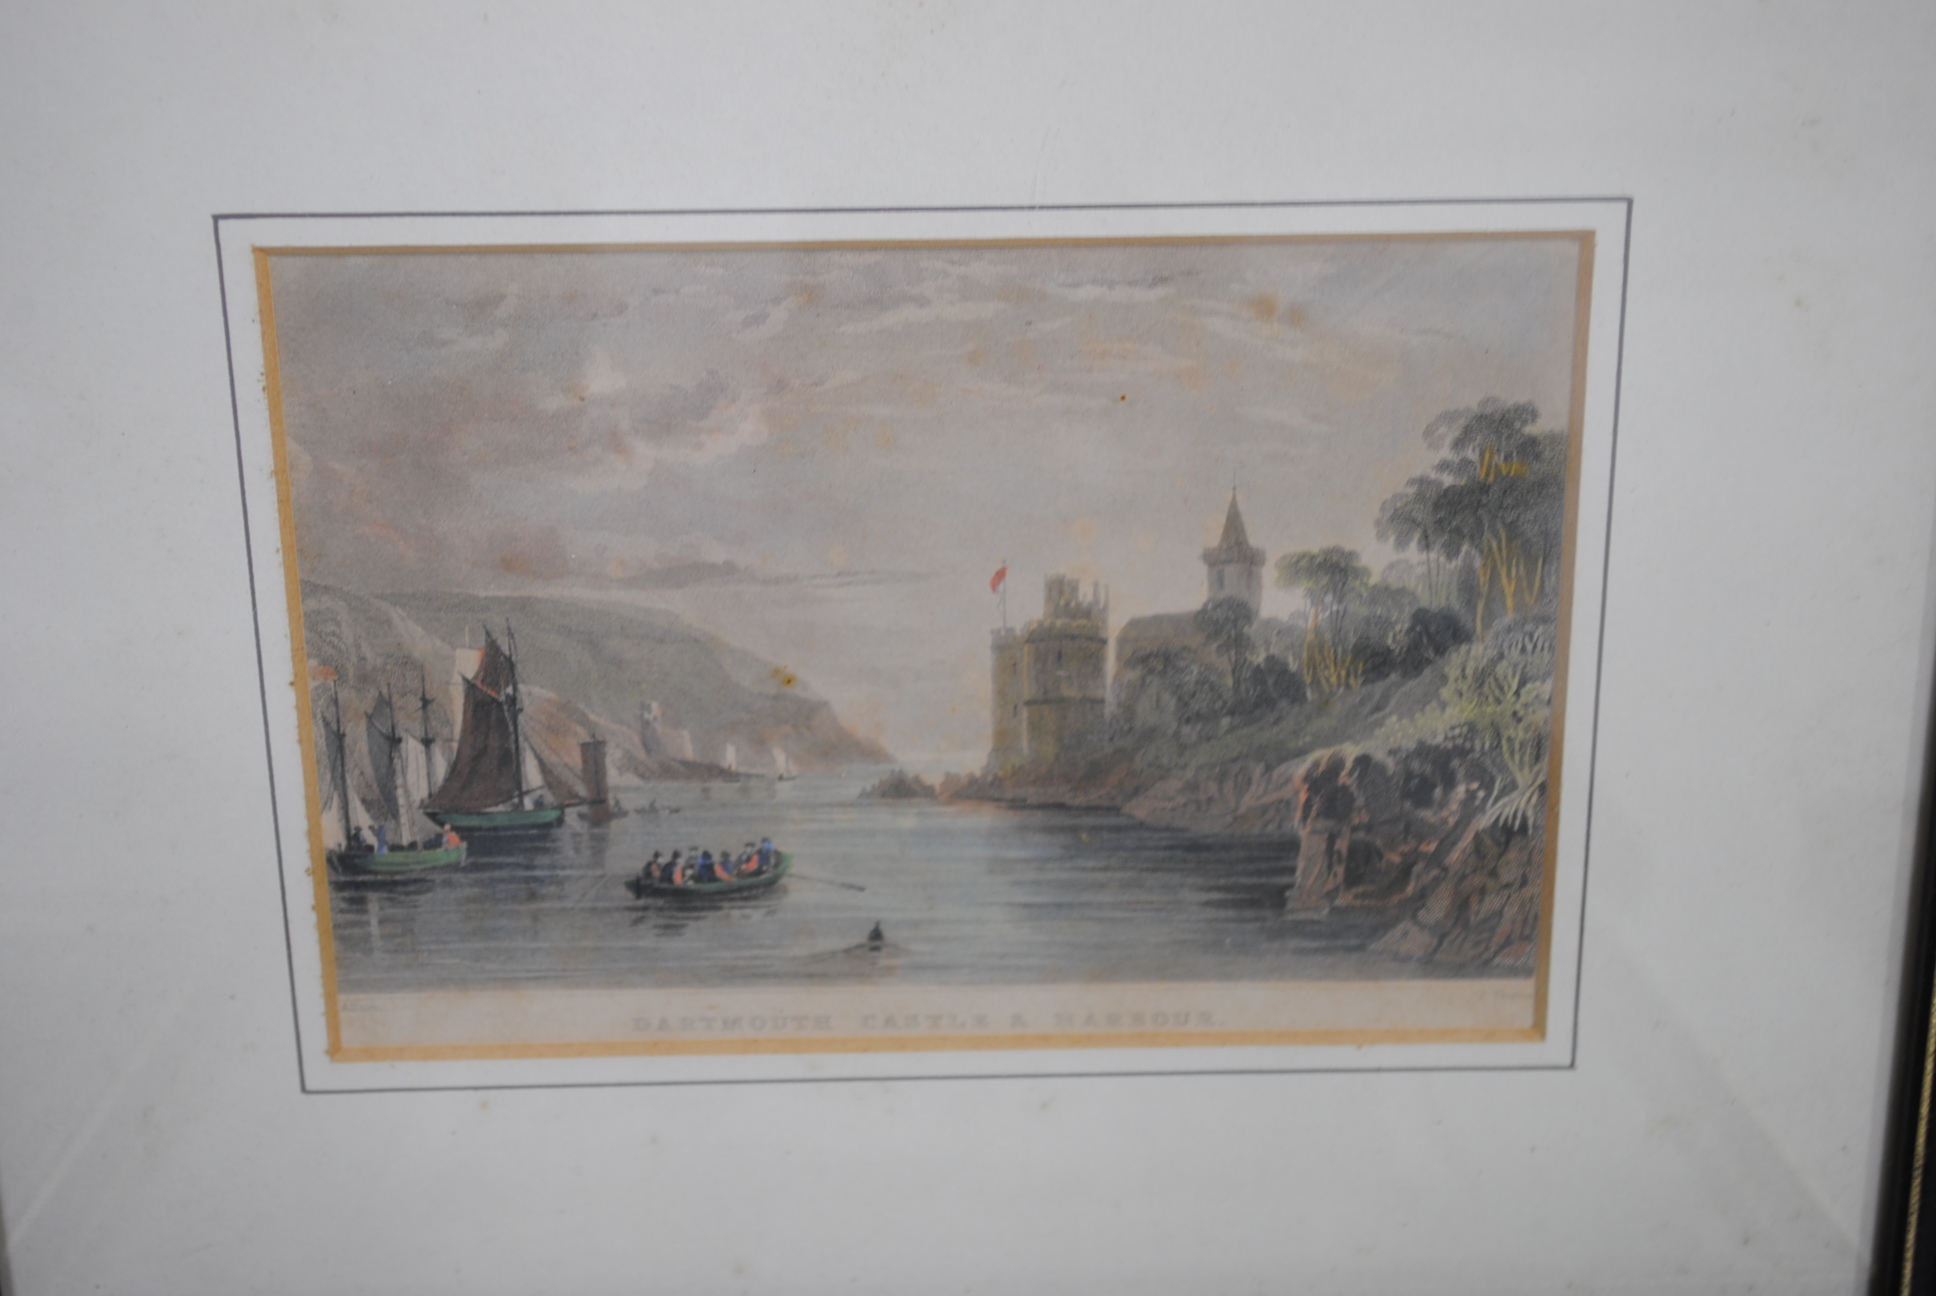 A collection of antique framed prints, all of local scenes including Colyton, Shute House, Exeter, - Image 12 of 17